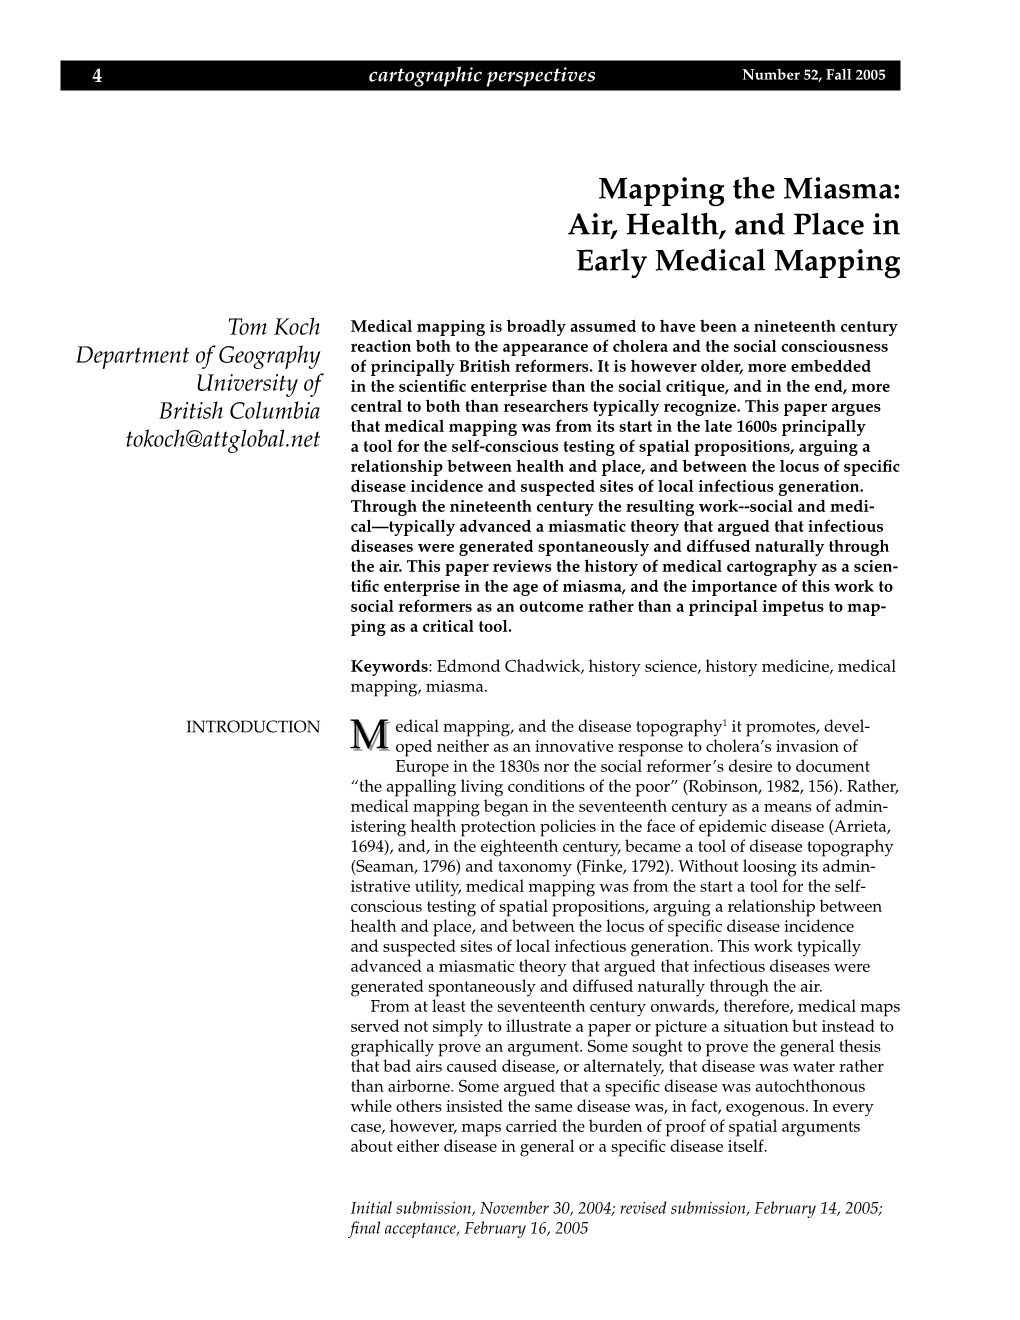 Mapping the Miasma: Air, Health, and Place in Early Medical Mapping